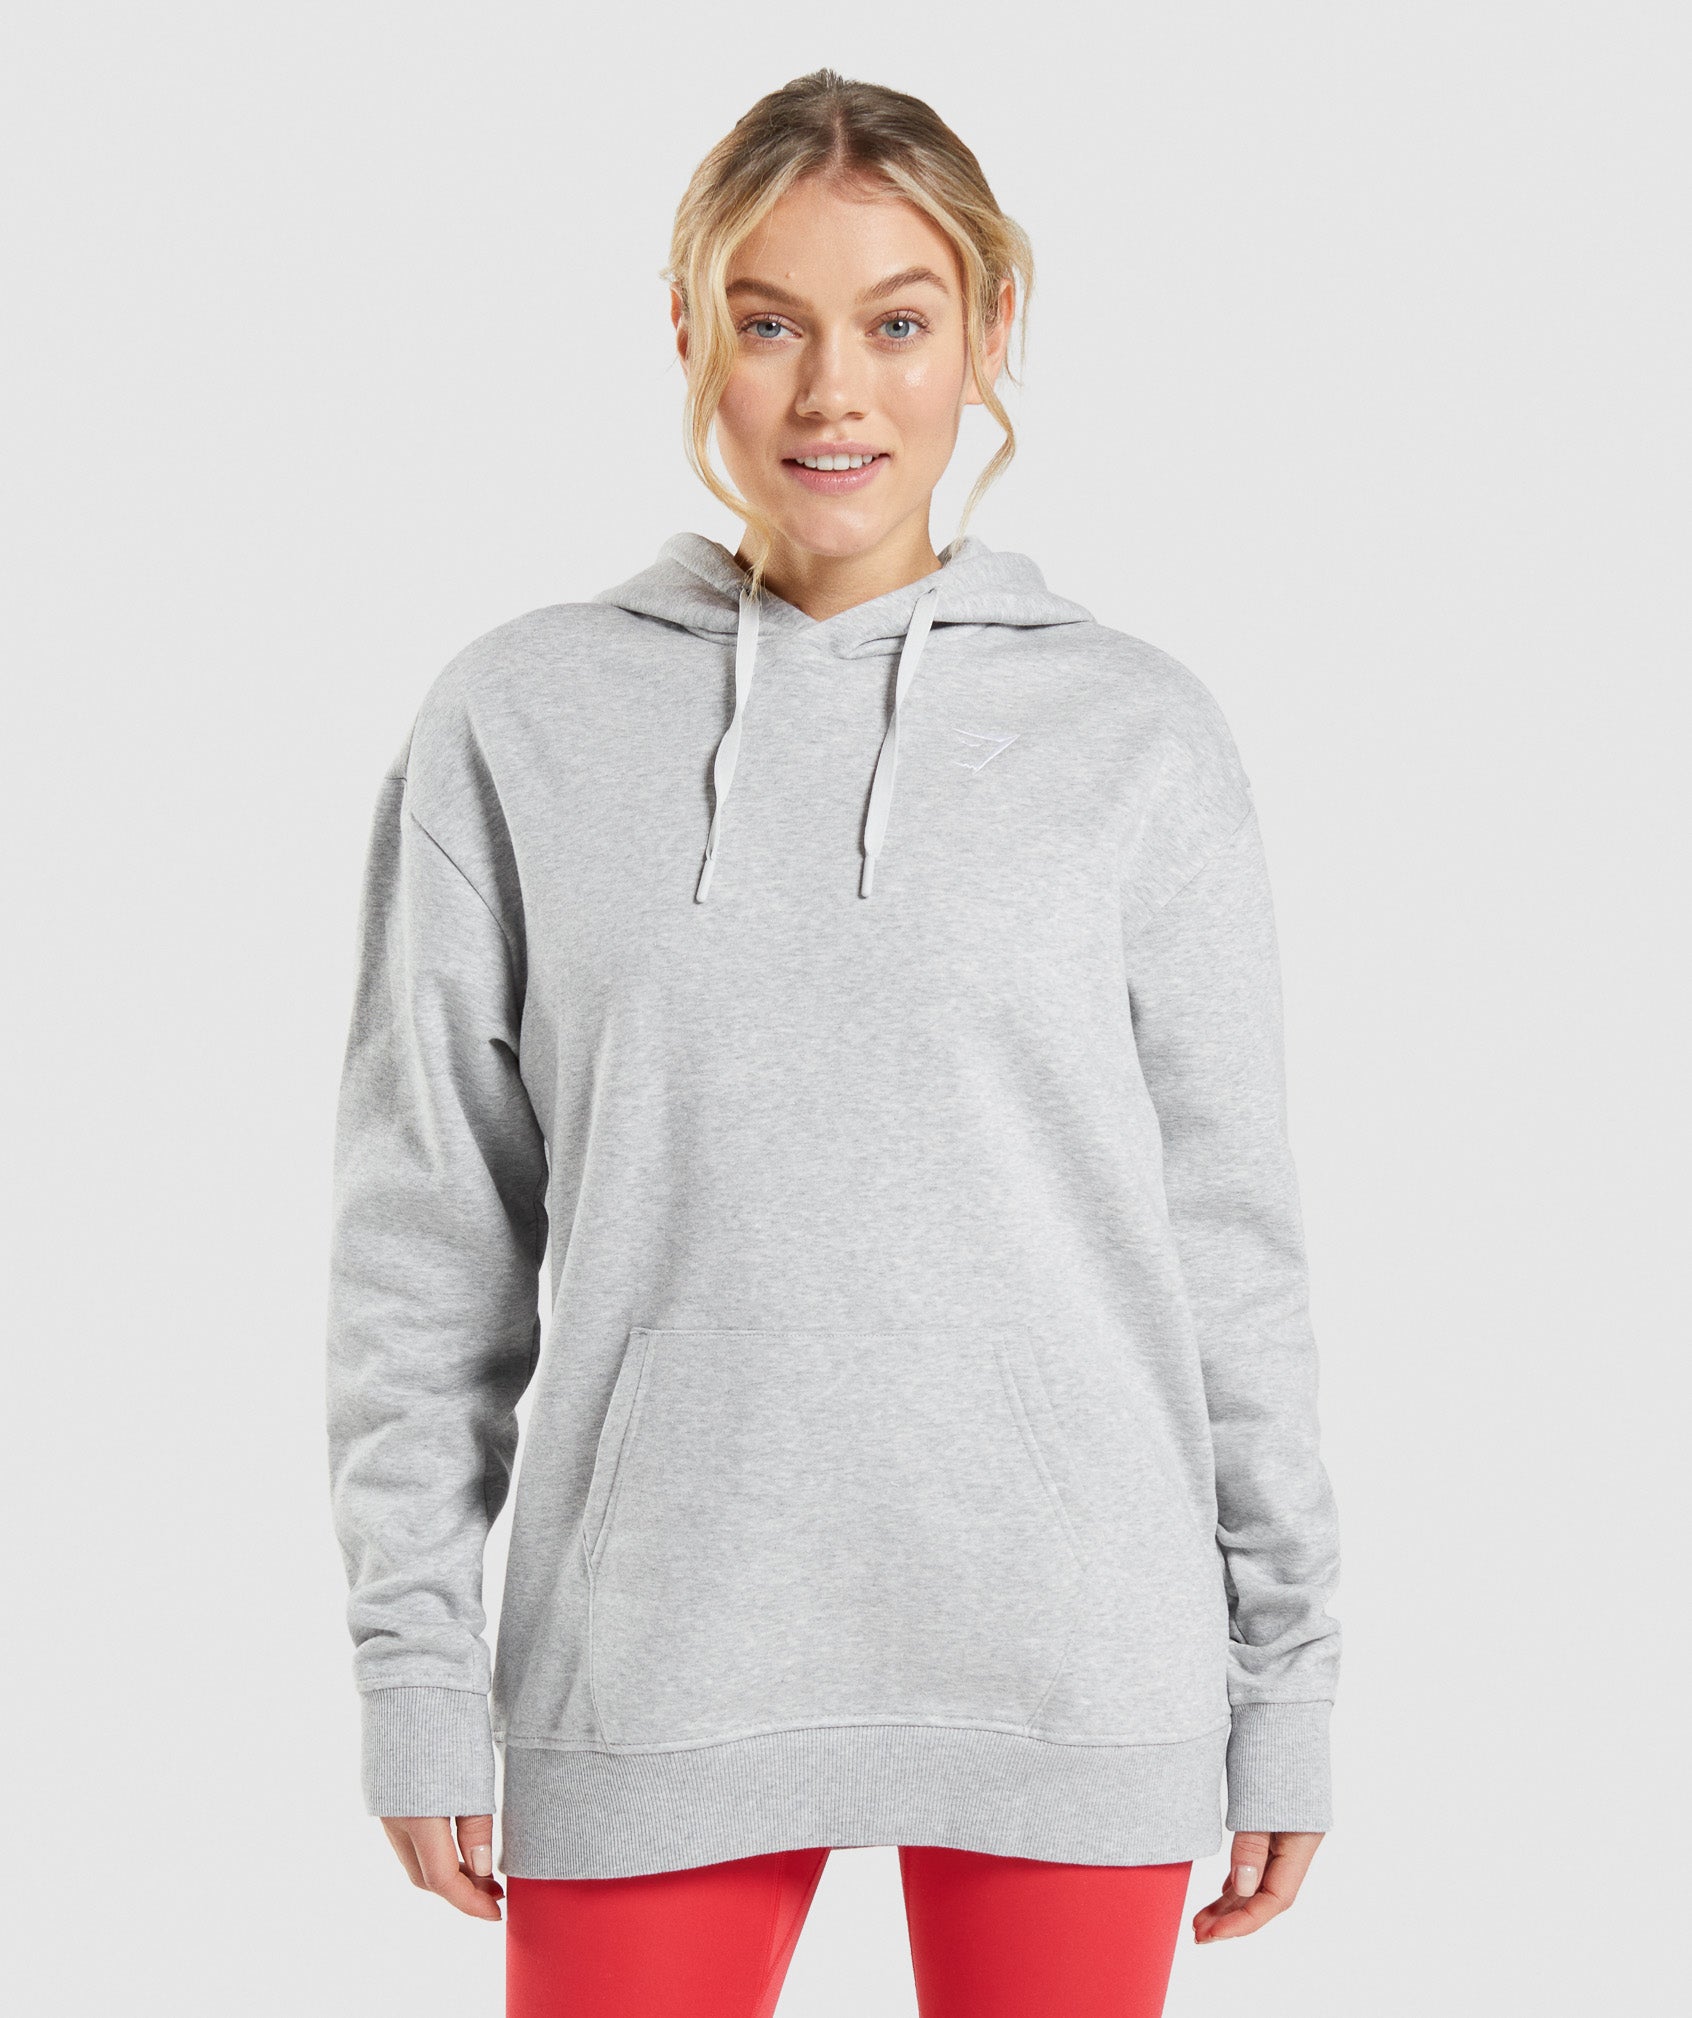  THE GYM PEOPLE Womens Basic Pullover Hoodie Loose